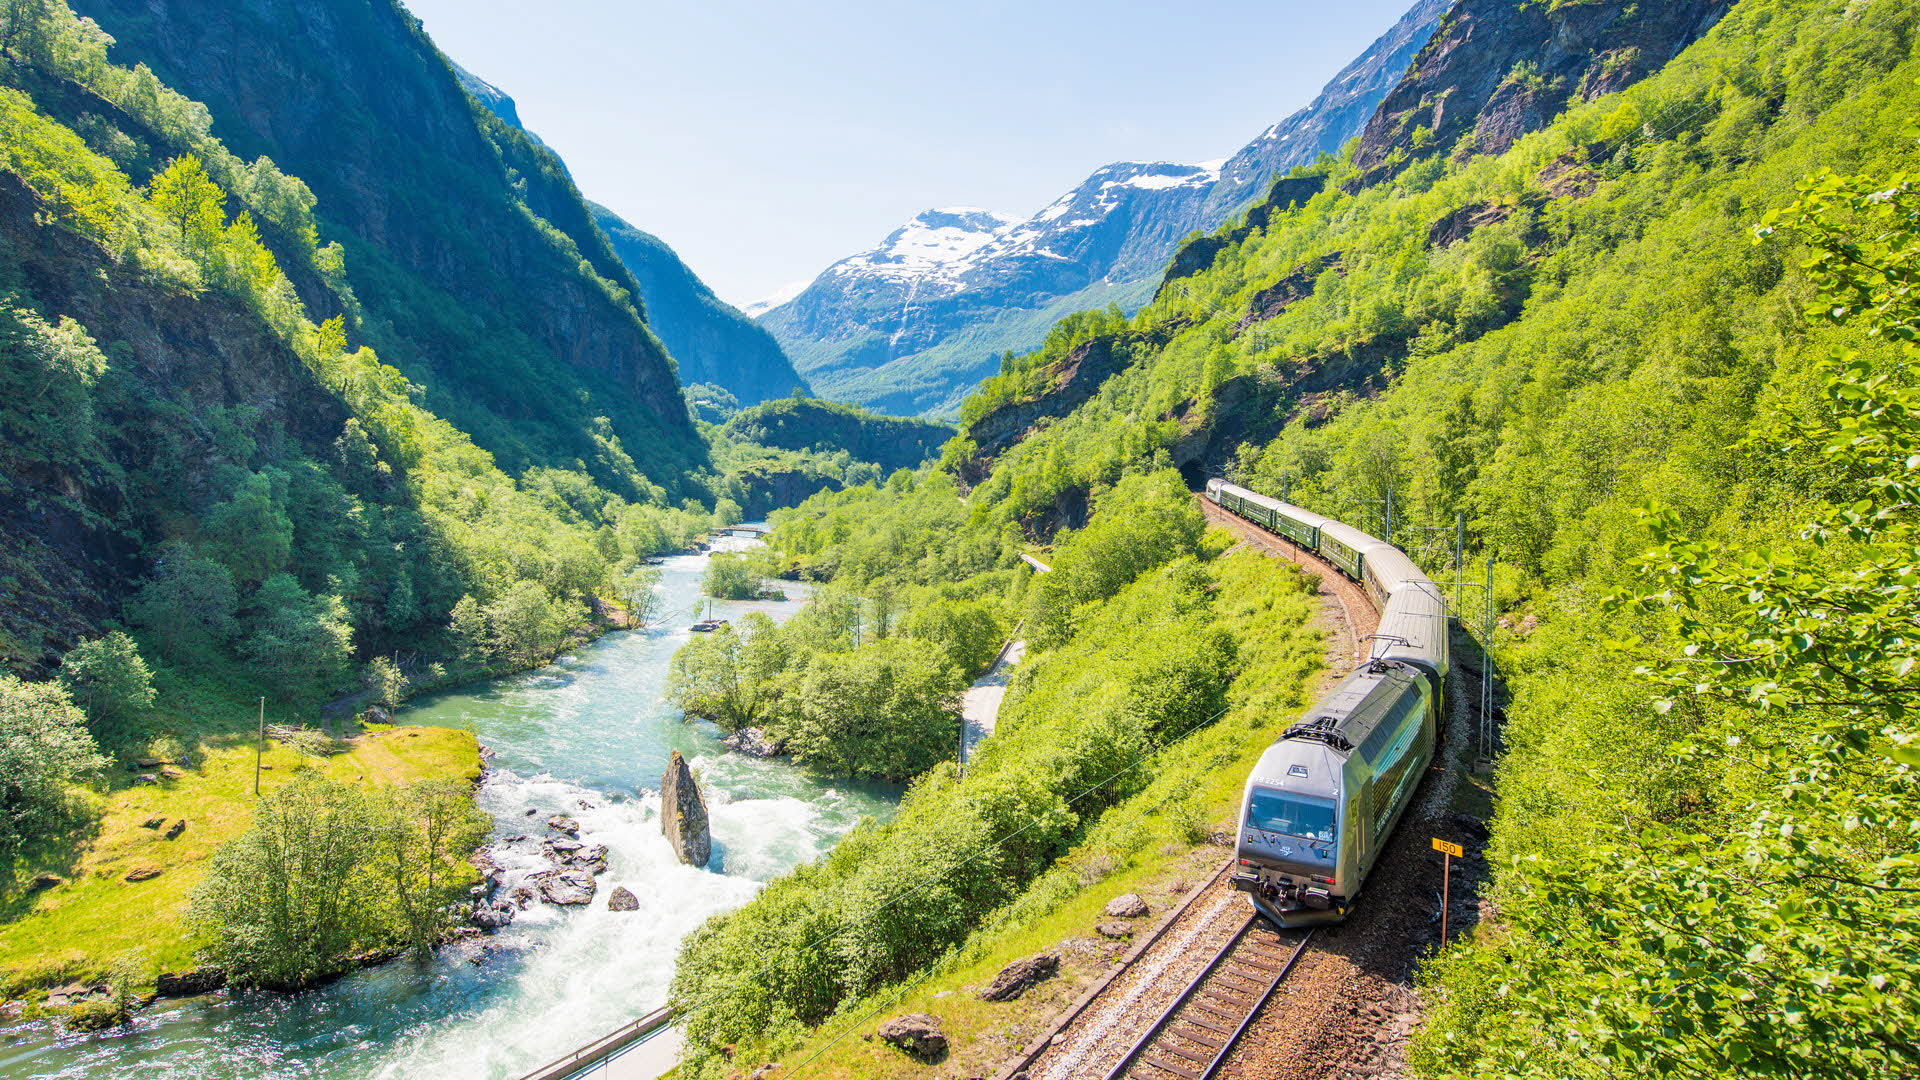 The Flåm Railway runs along the side of the river in the fertile Flåmsdalen Valley, with white mountain peaks in the background